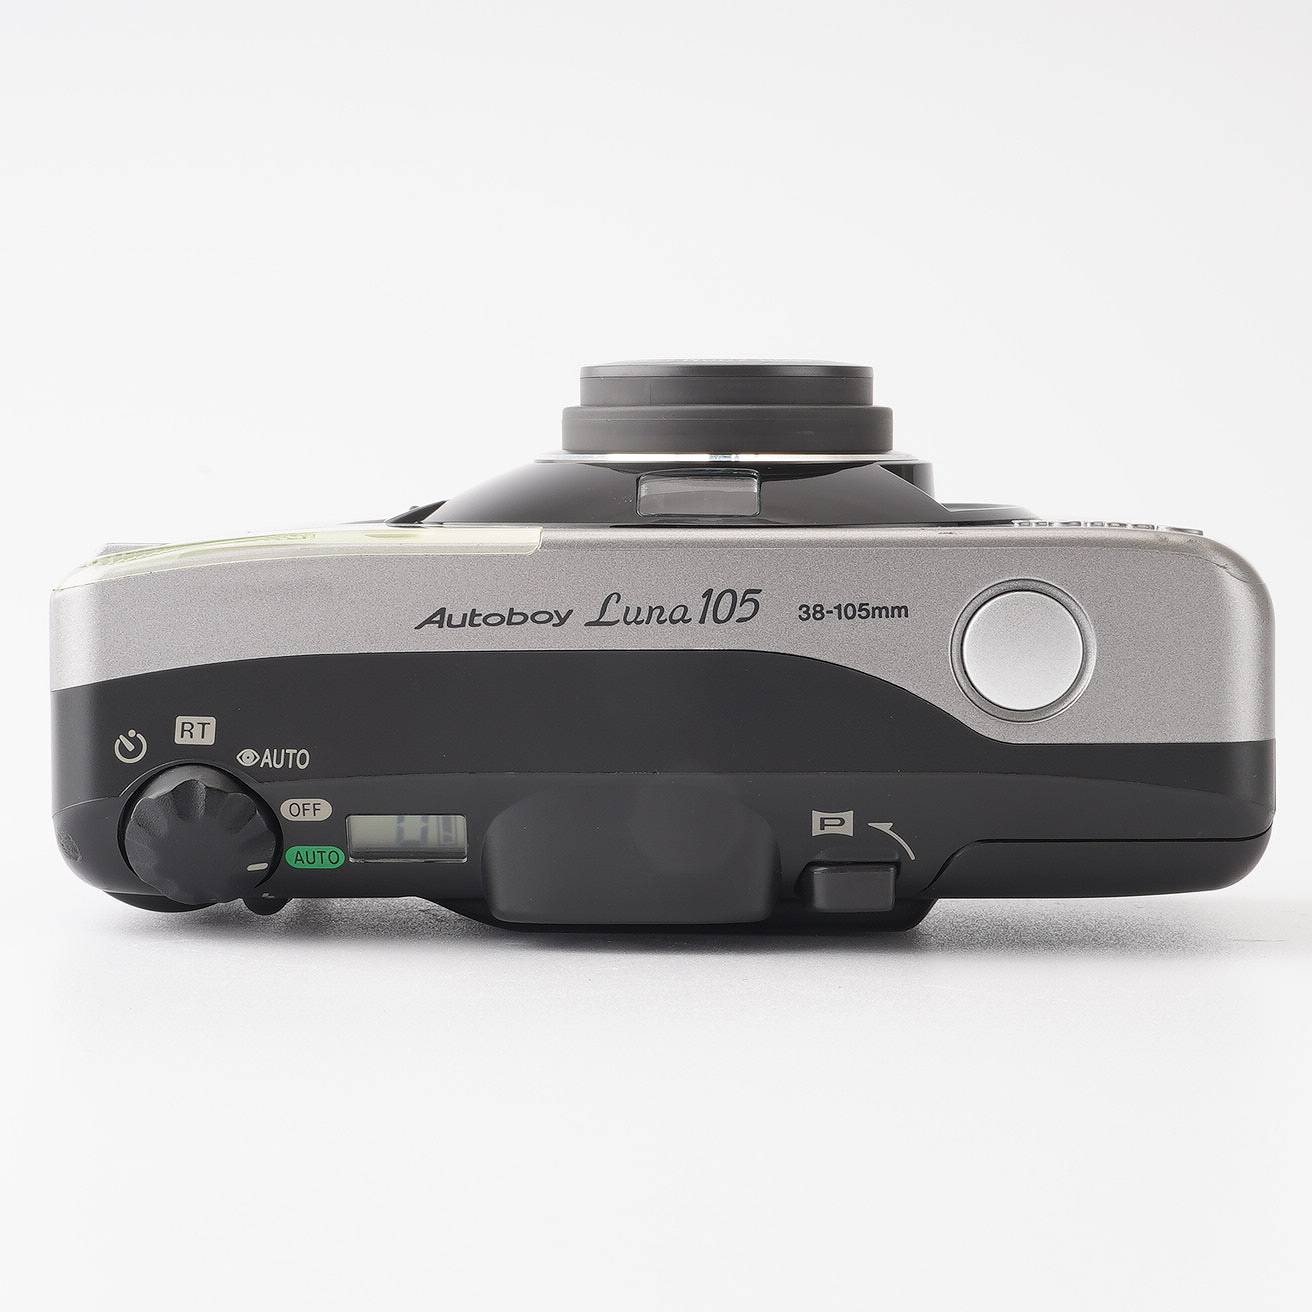 Canon Autoboy Luna 105 PANORAMA AiAF / ZOOM 38-105mm – Natural 